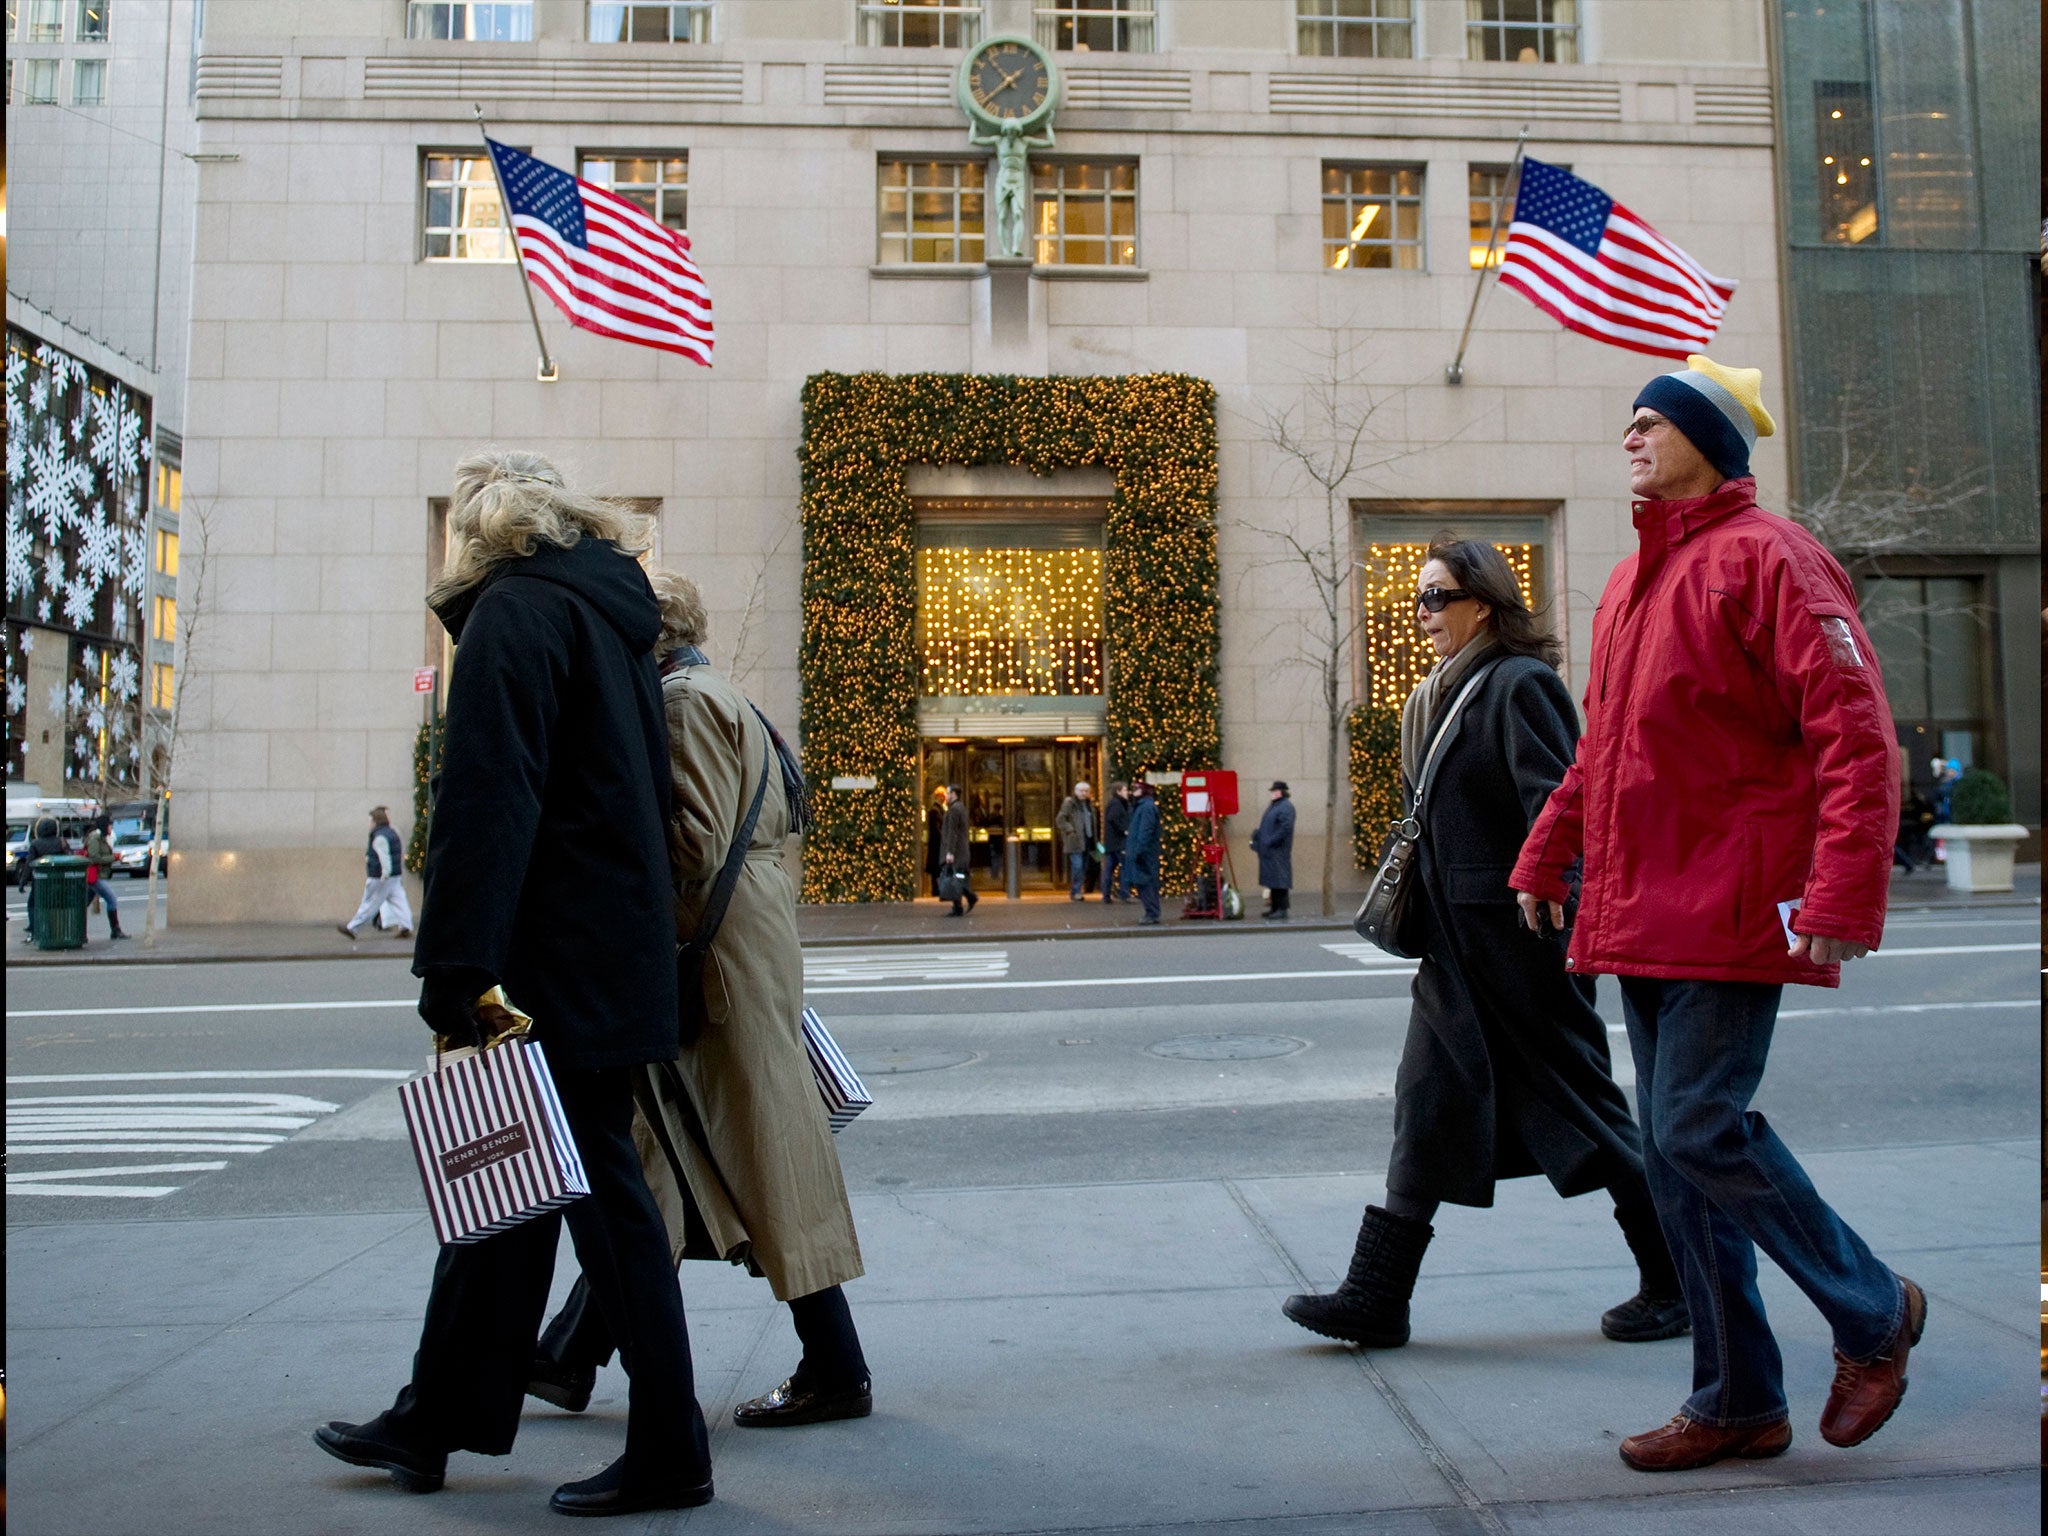 New York's 5th Avenue still the world's most expensive shopping street